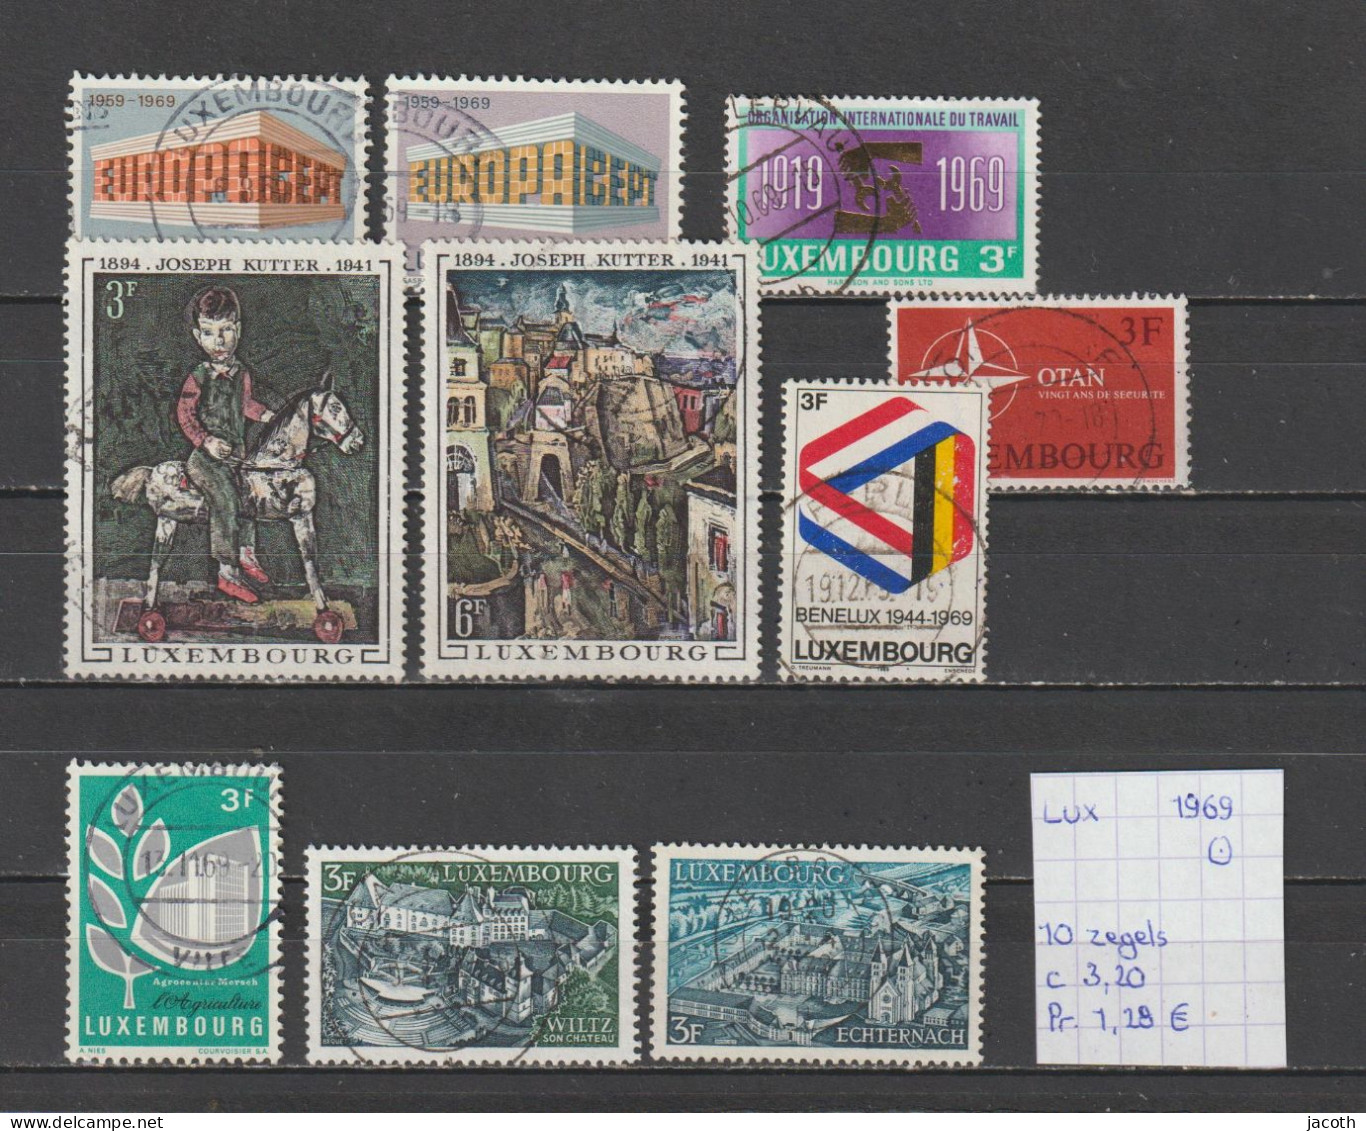 (TJ) Luxembourg 1969 - 10 Zegels (gest./obl./used) - Usados